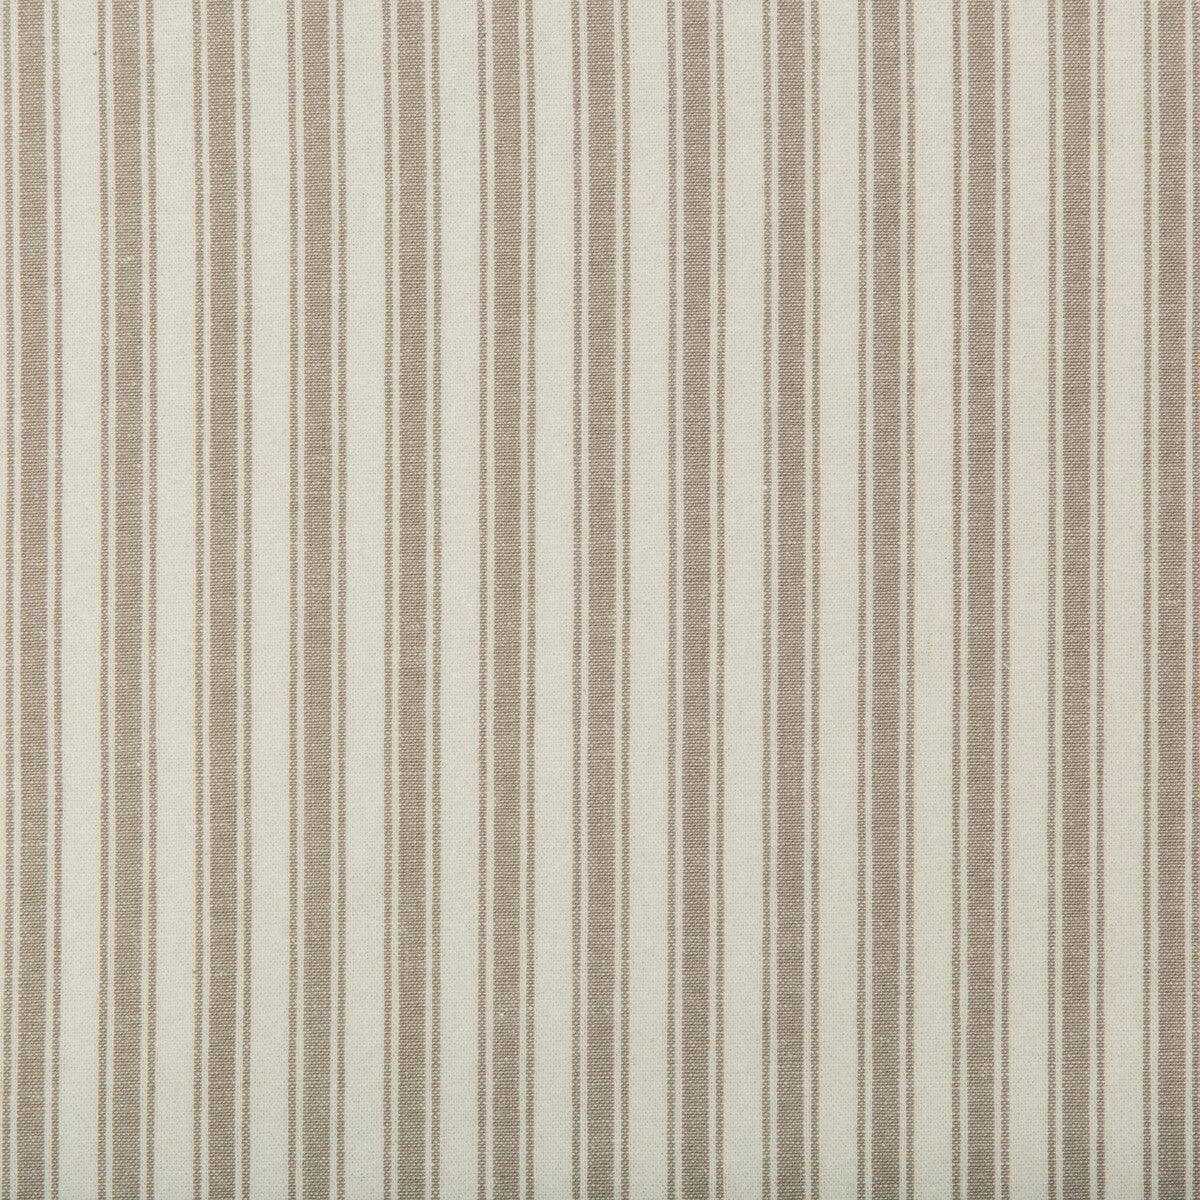 Seastripe fabric in linen color - pattern 35542.16.0 - by Kravet Basics in the Bermuda collection